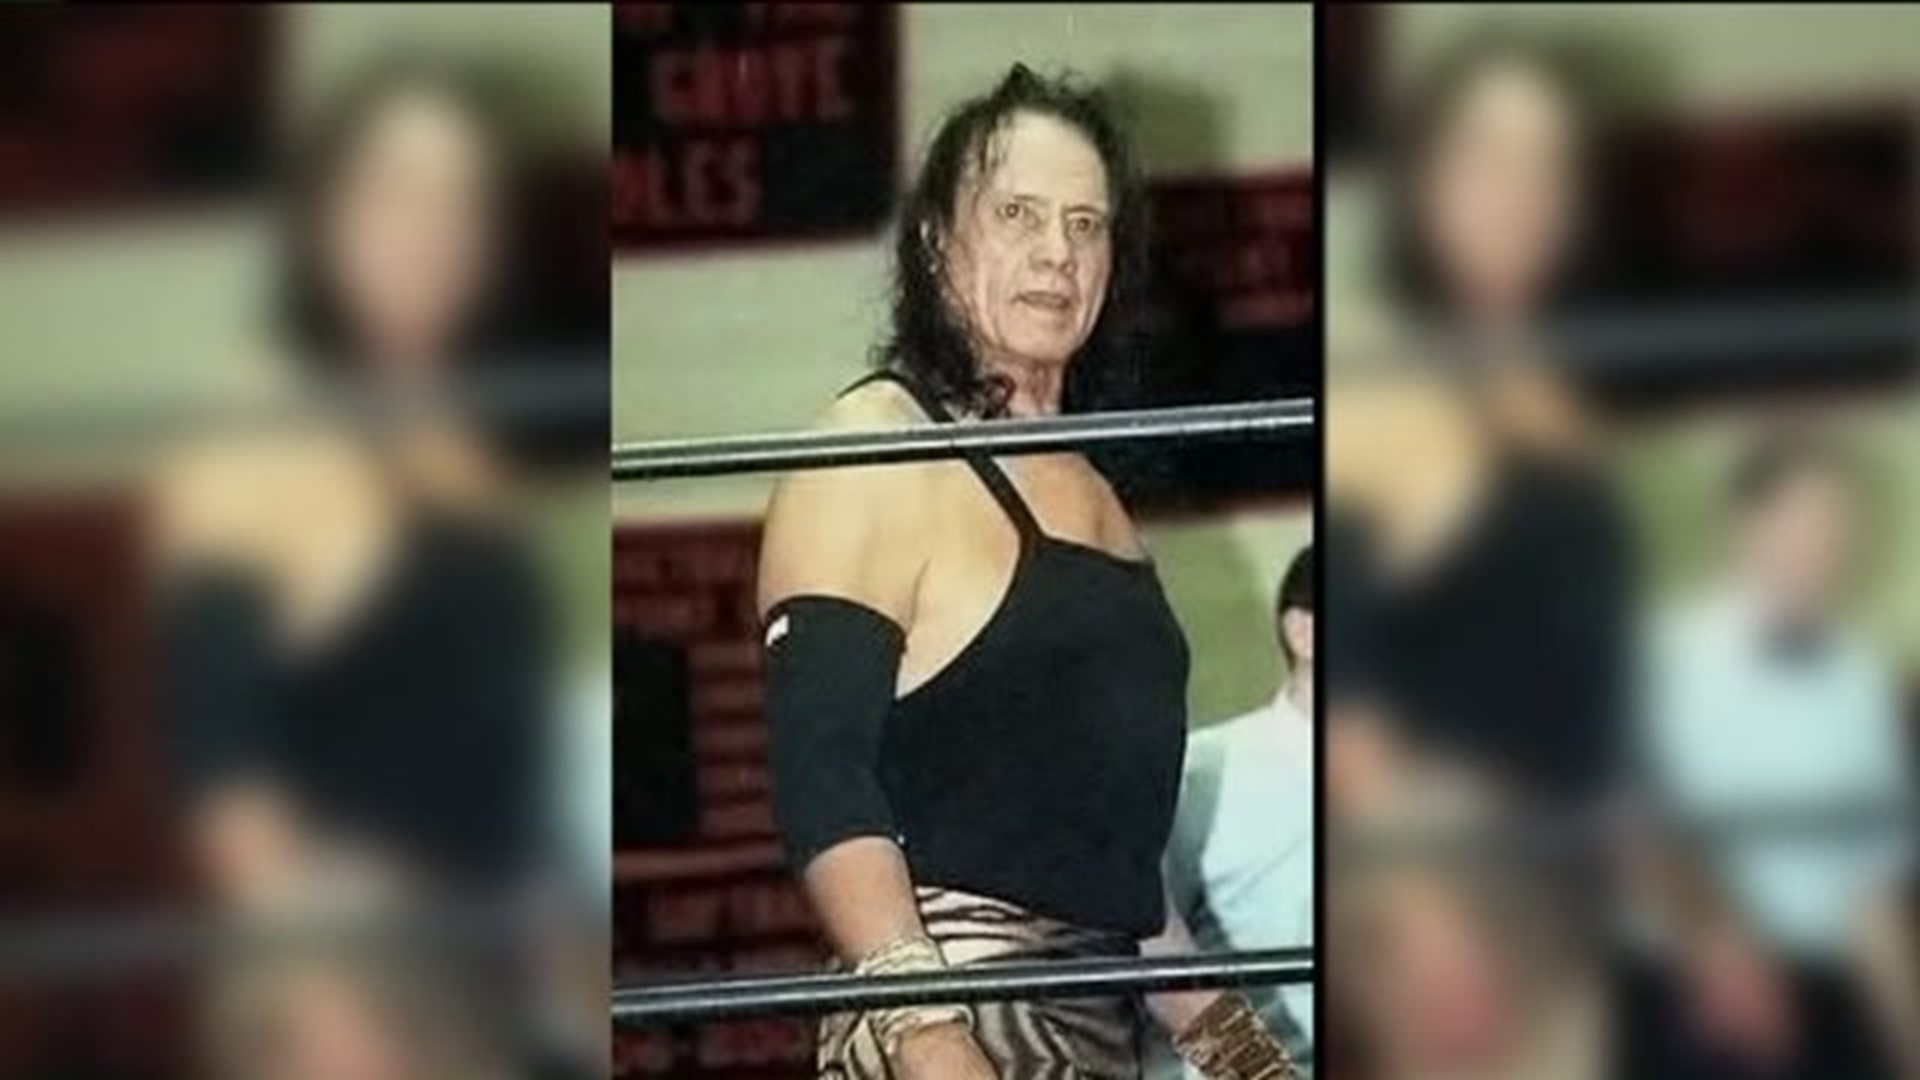 Former Pro-Wrestler Charged With Murder, Local Fans React